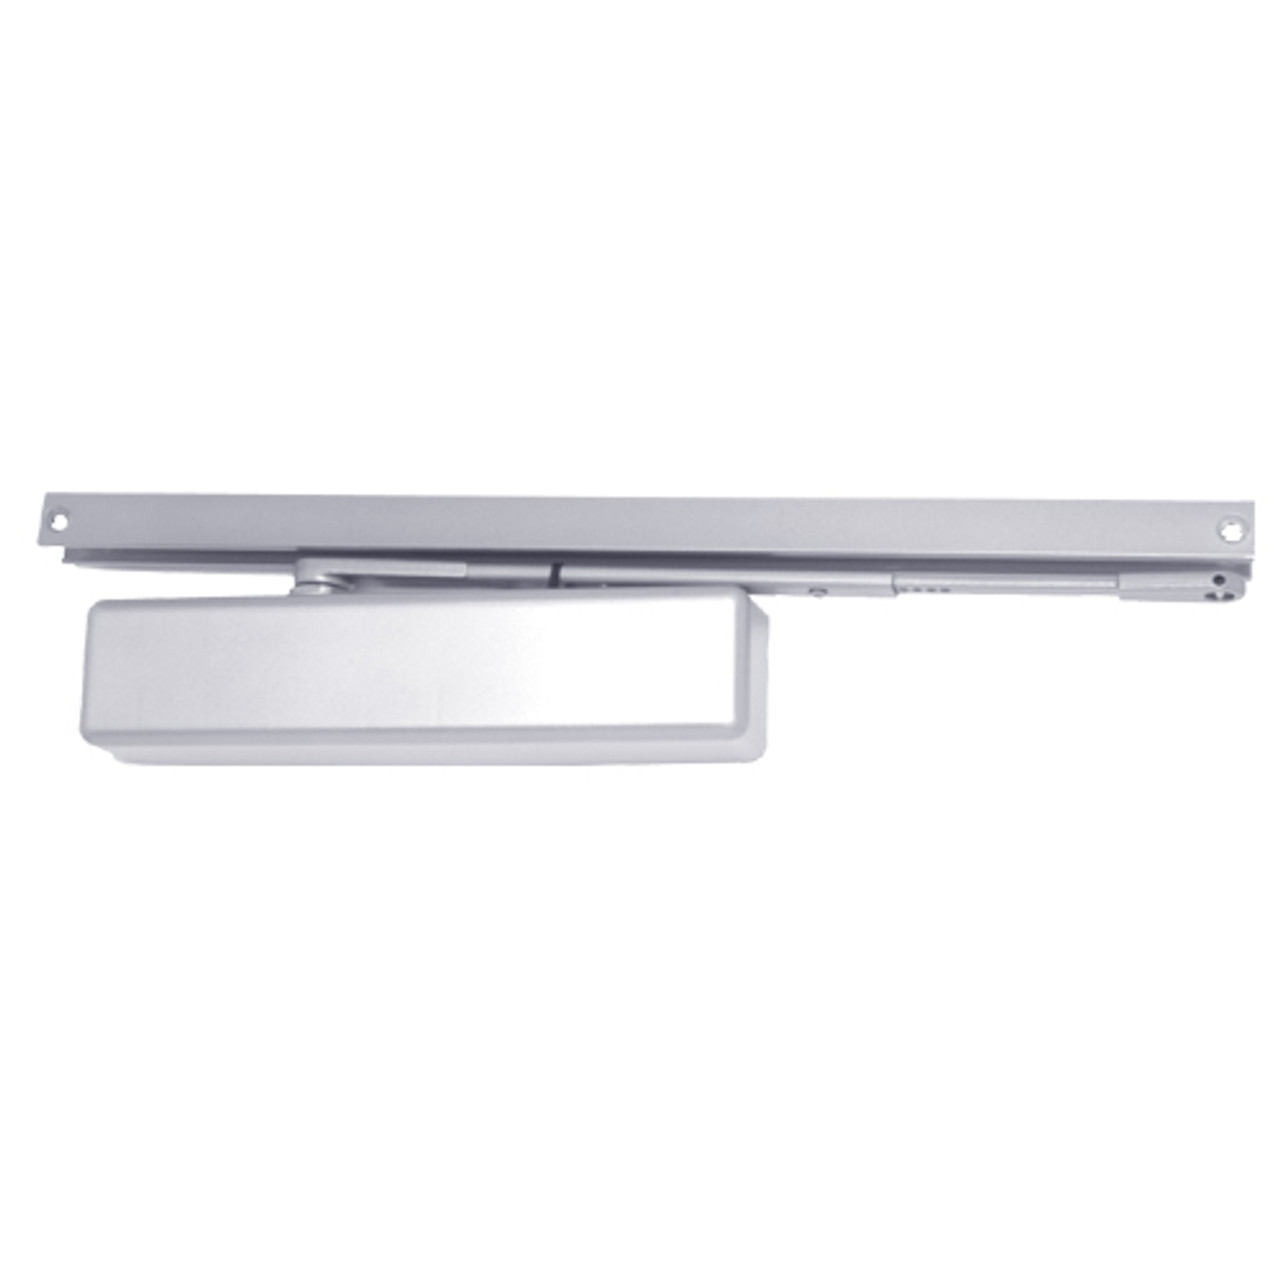 1460T-H-US26-FC LCN Surface Mount Door Closer with Hold Open Arm in Bright Chrome Finish